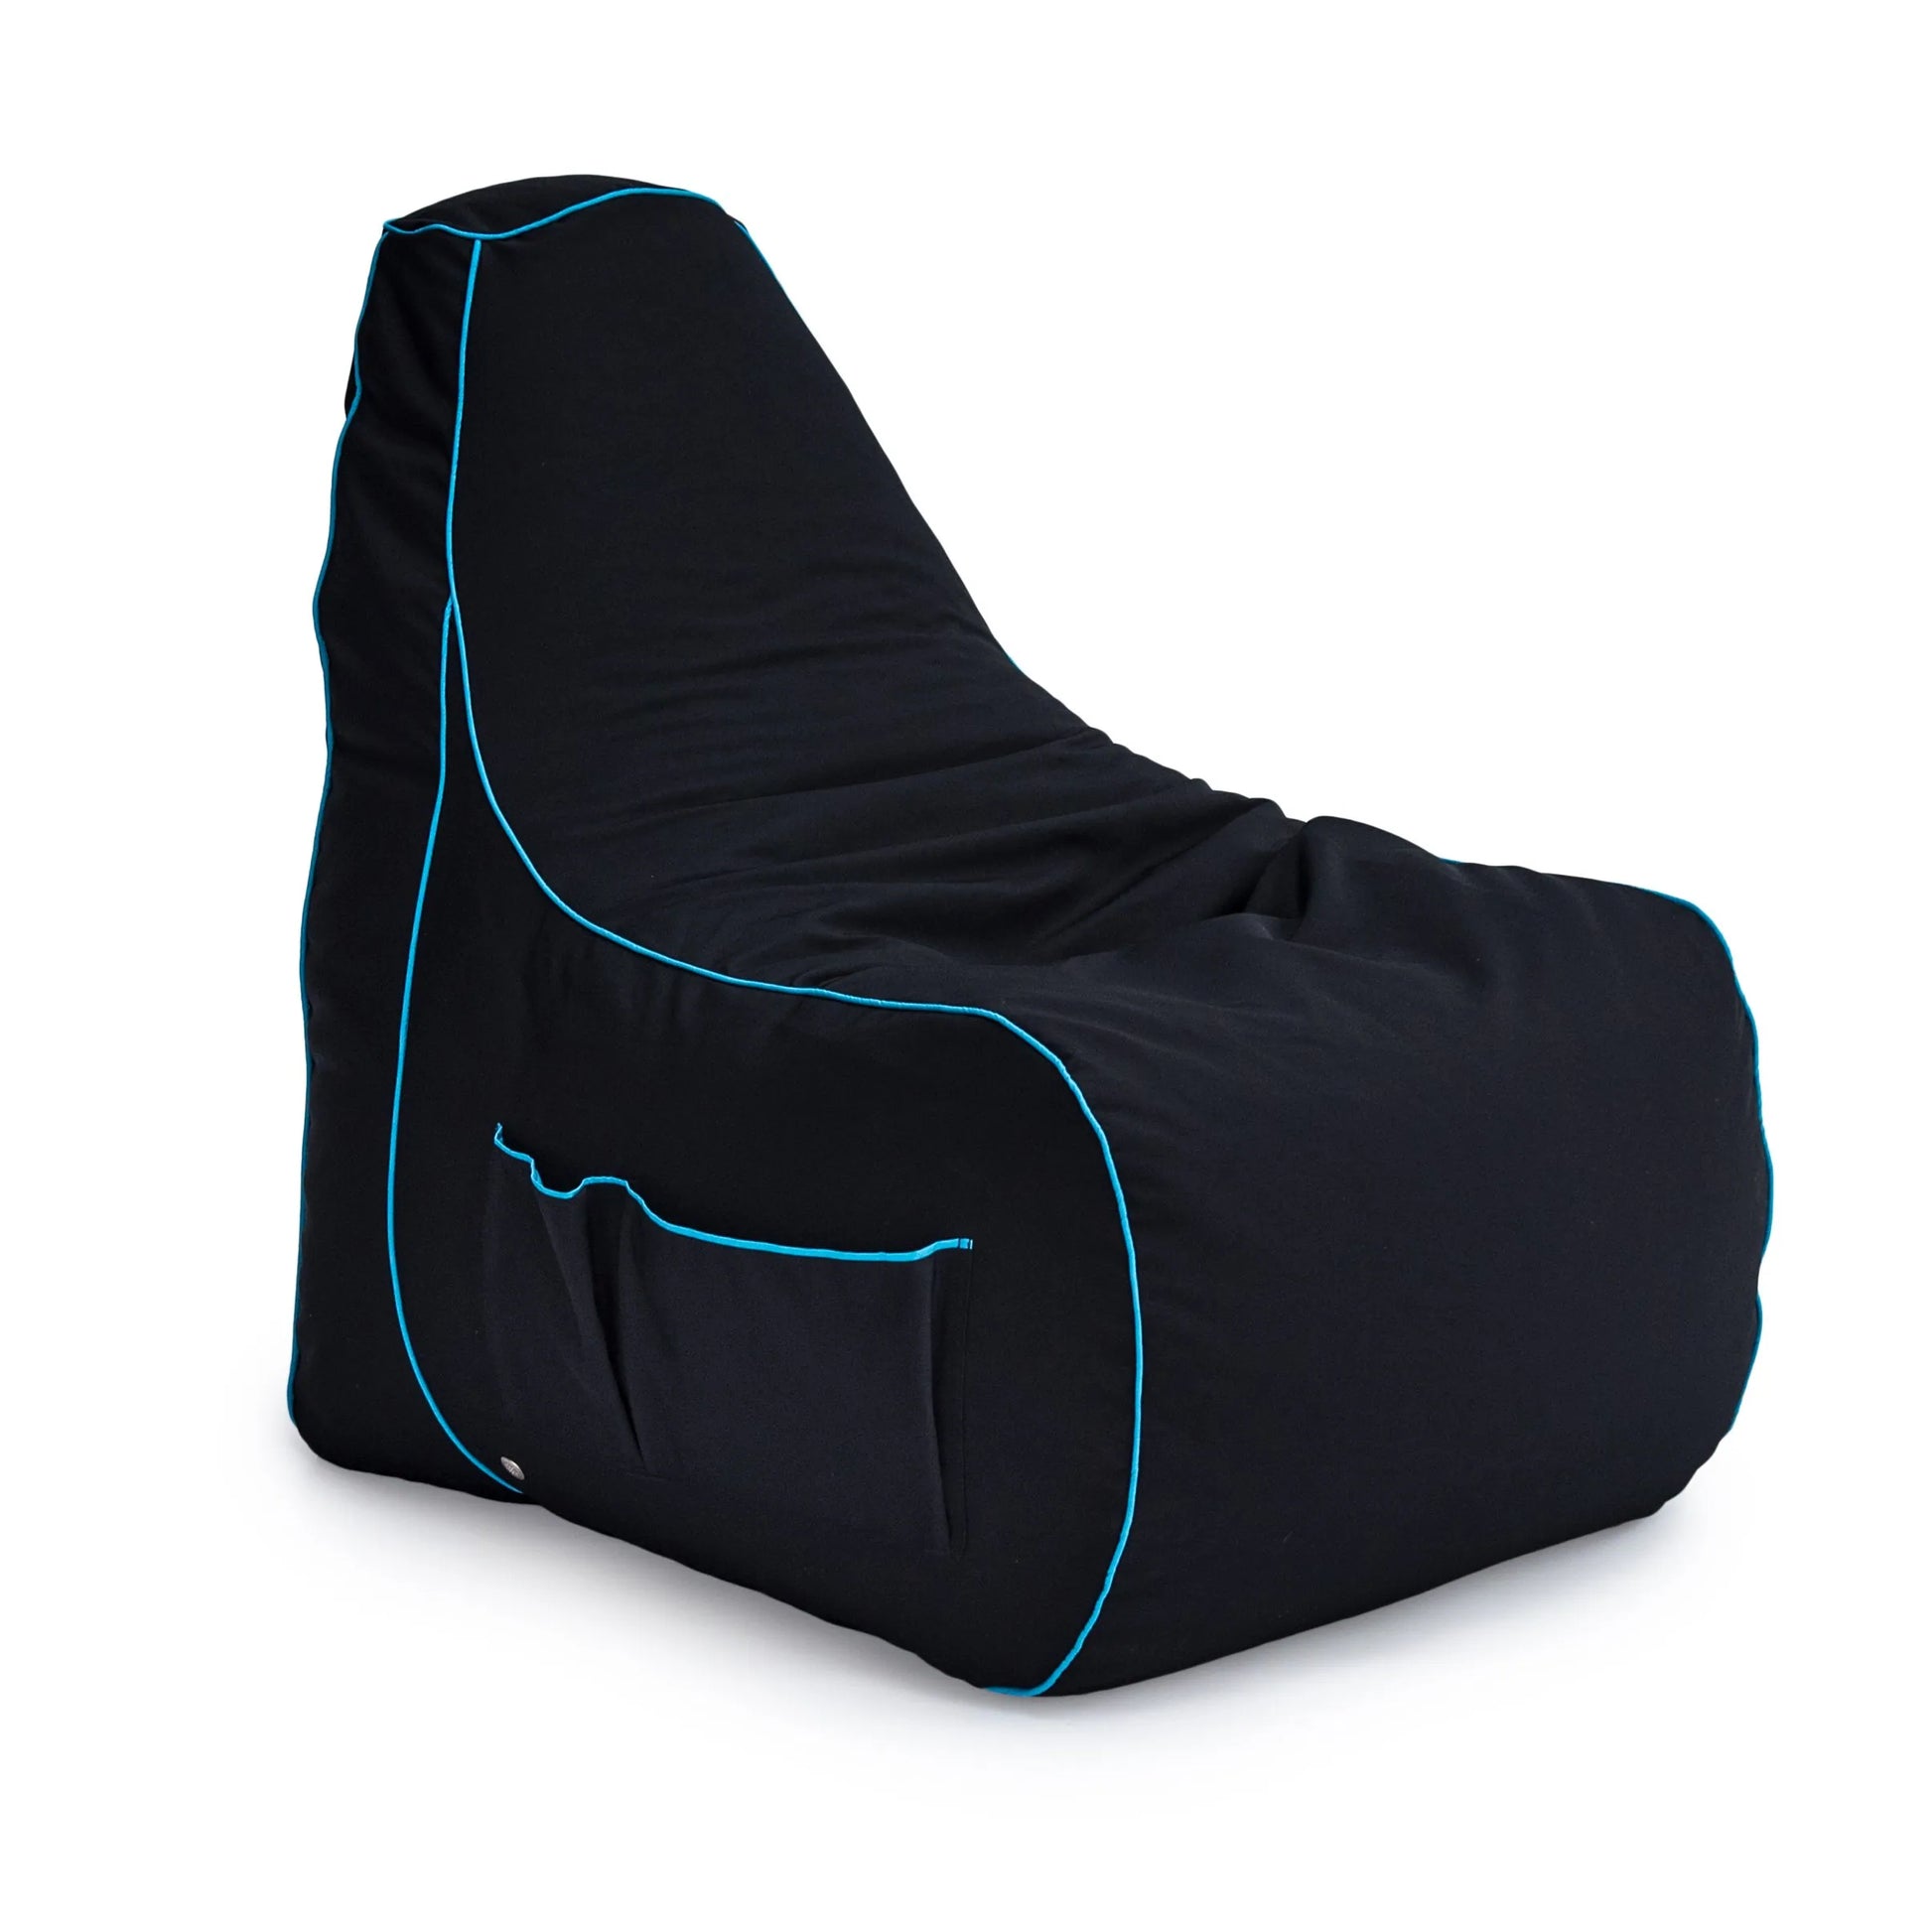 Bean bag cover for gaming or lounging